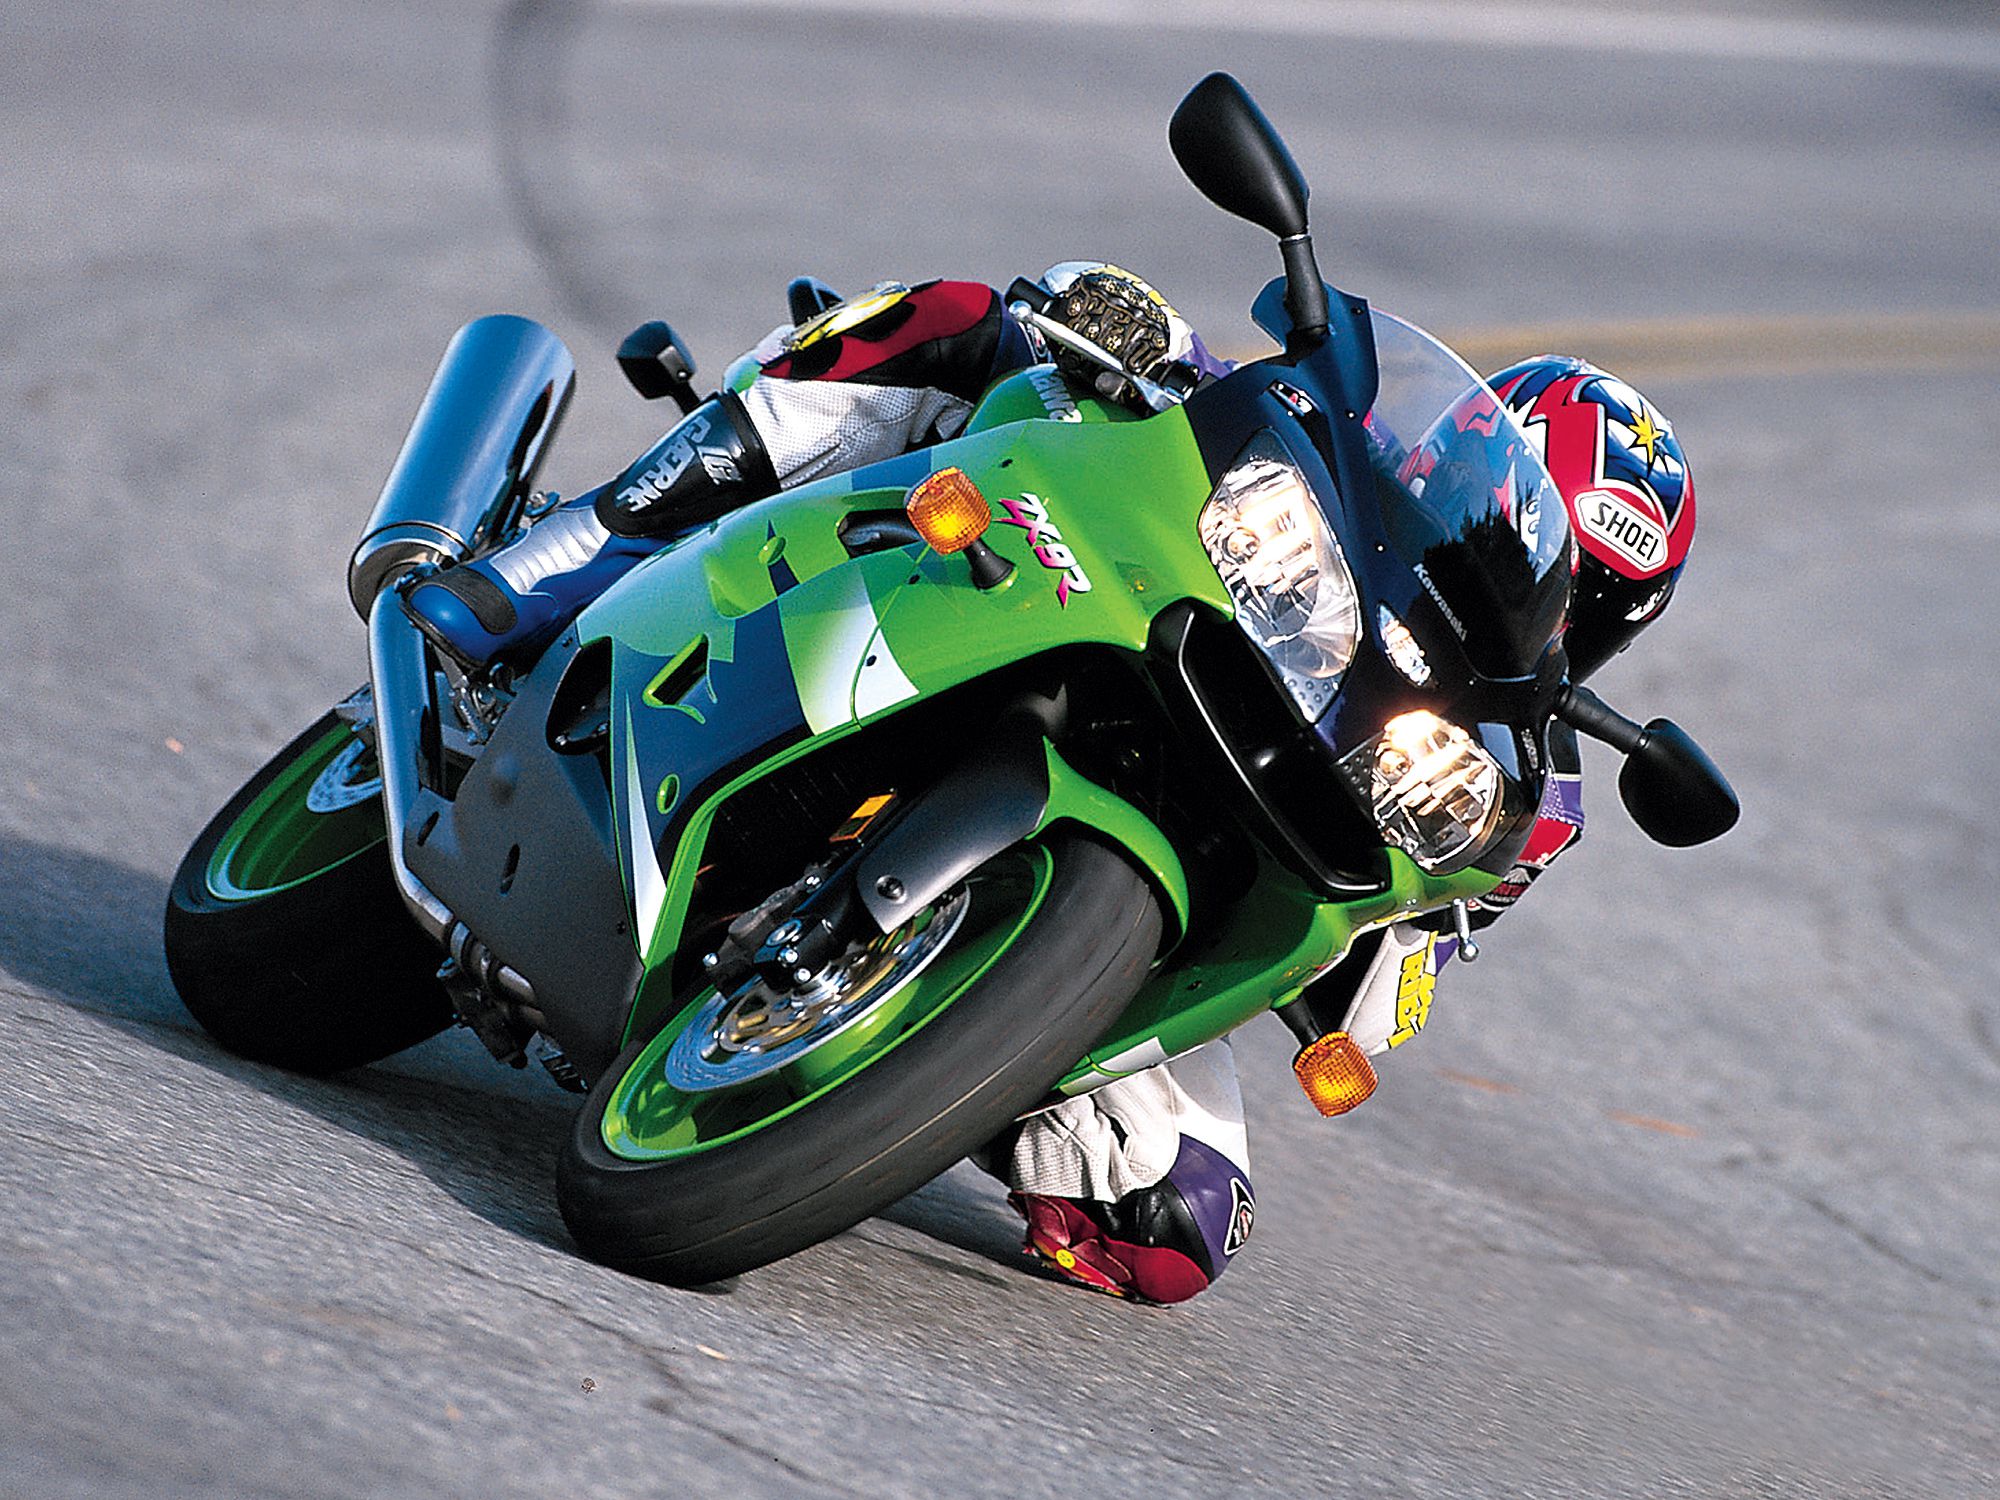 Full Test of the Revamped-for-2000 Kawasaki ZX-9R—From The 